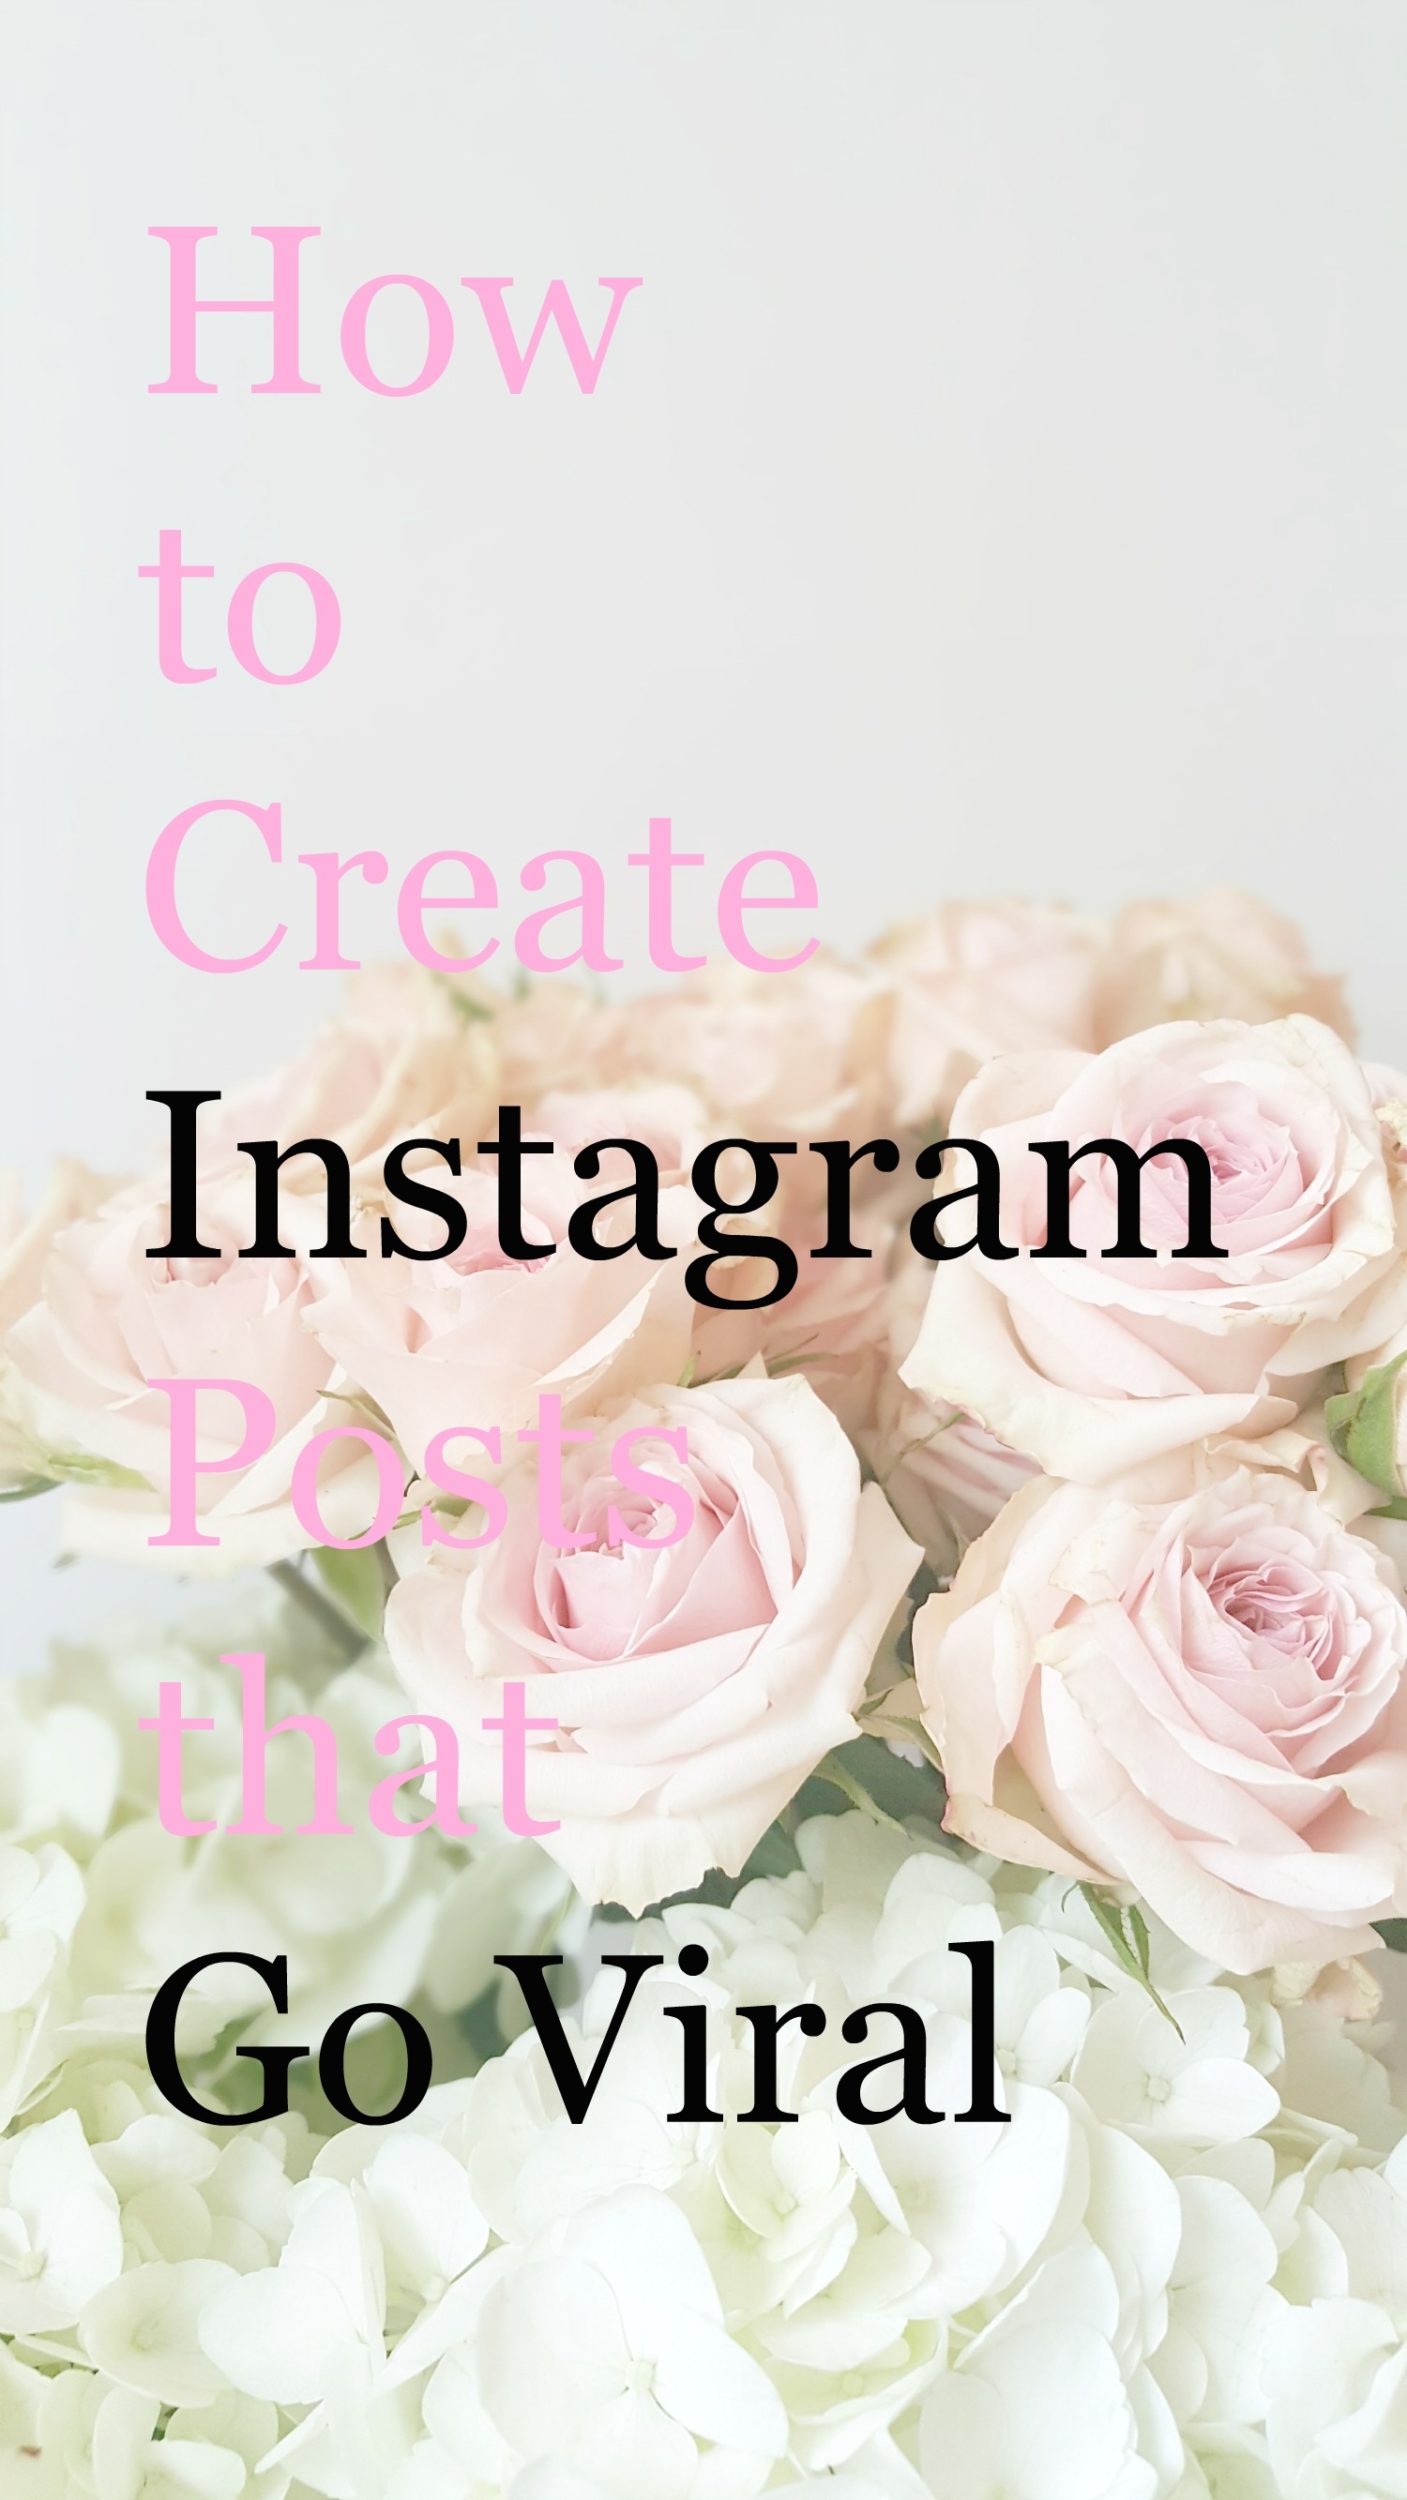 How to Create Instagram Posts that Go Viral